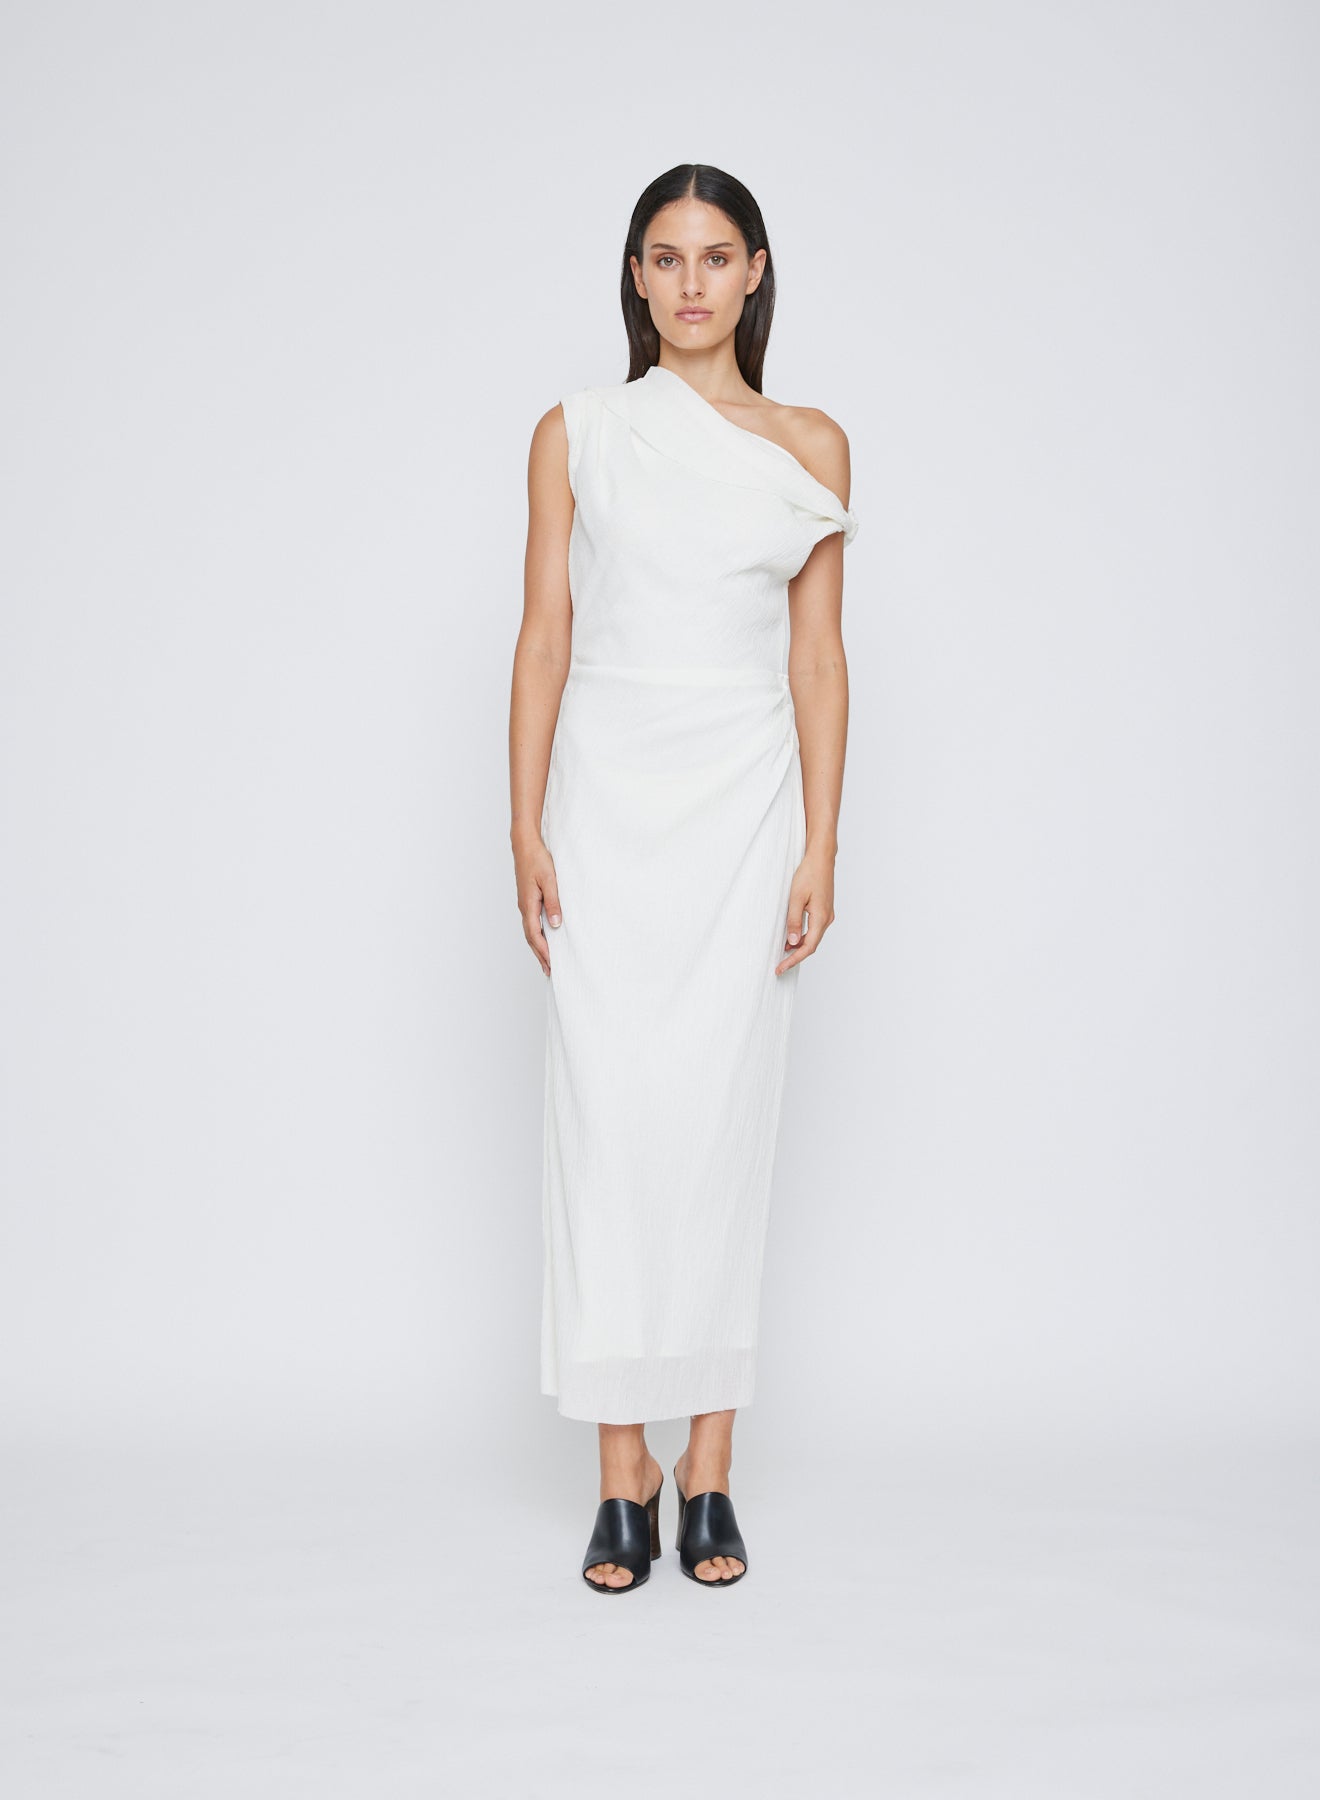 ANNA QUAN Off-Shoulder Crinkle White Midi Dress, a versatile and timeless addition to your wardrobe. Discover all new dresses for any event or special occasion. White midi-dress, white event dress, wedding party dress, ivory midi-dress, ivory event dress, ivory special occasion dress.